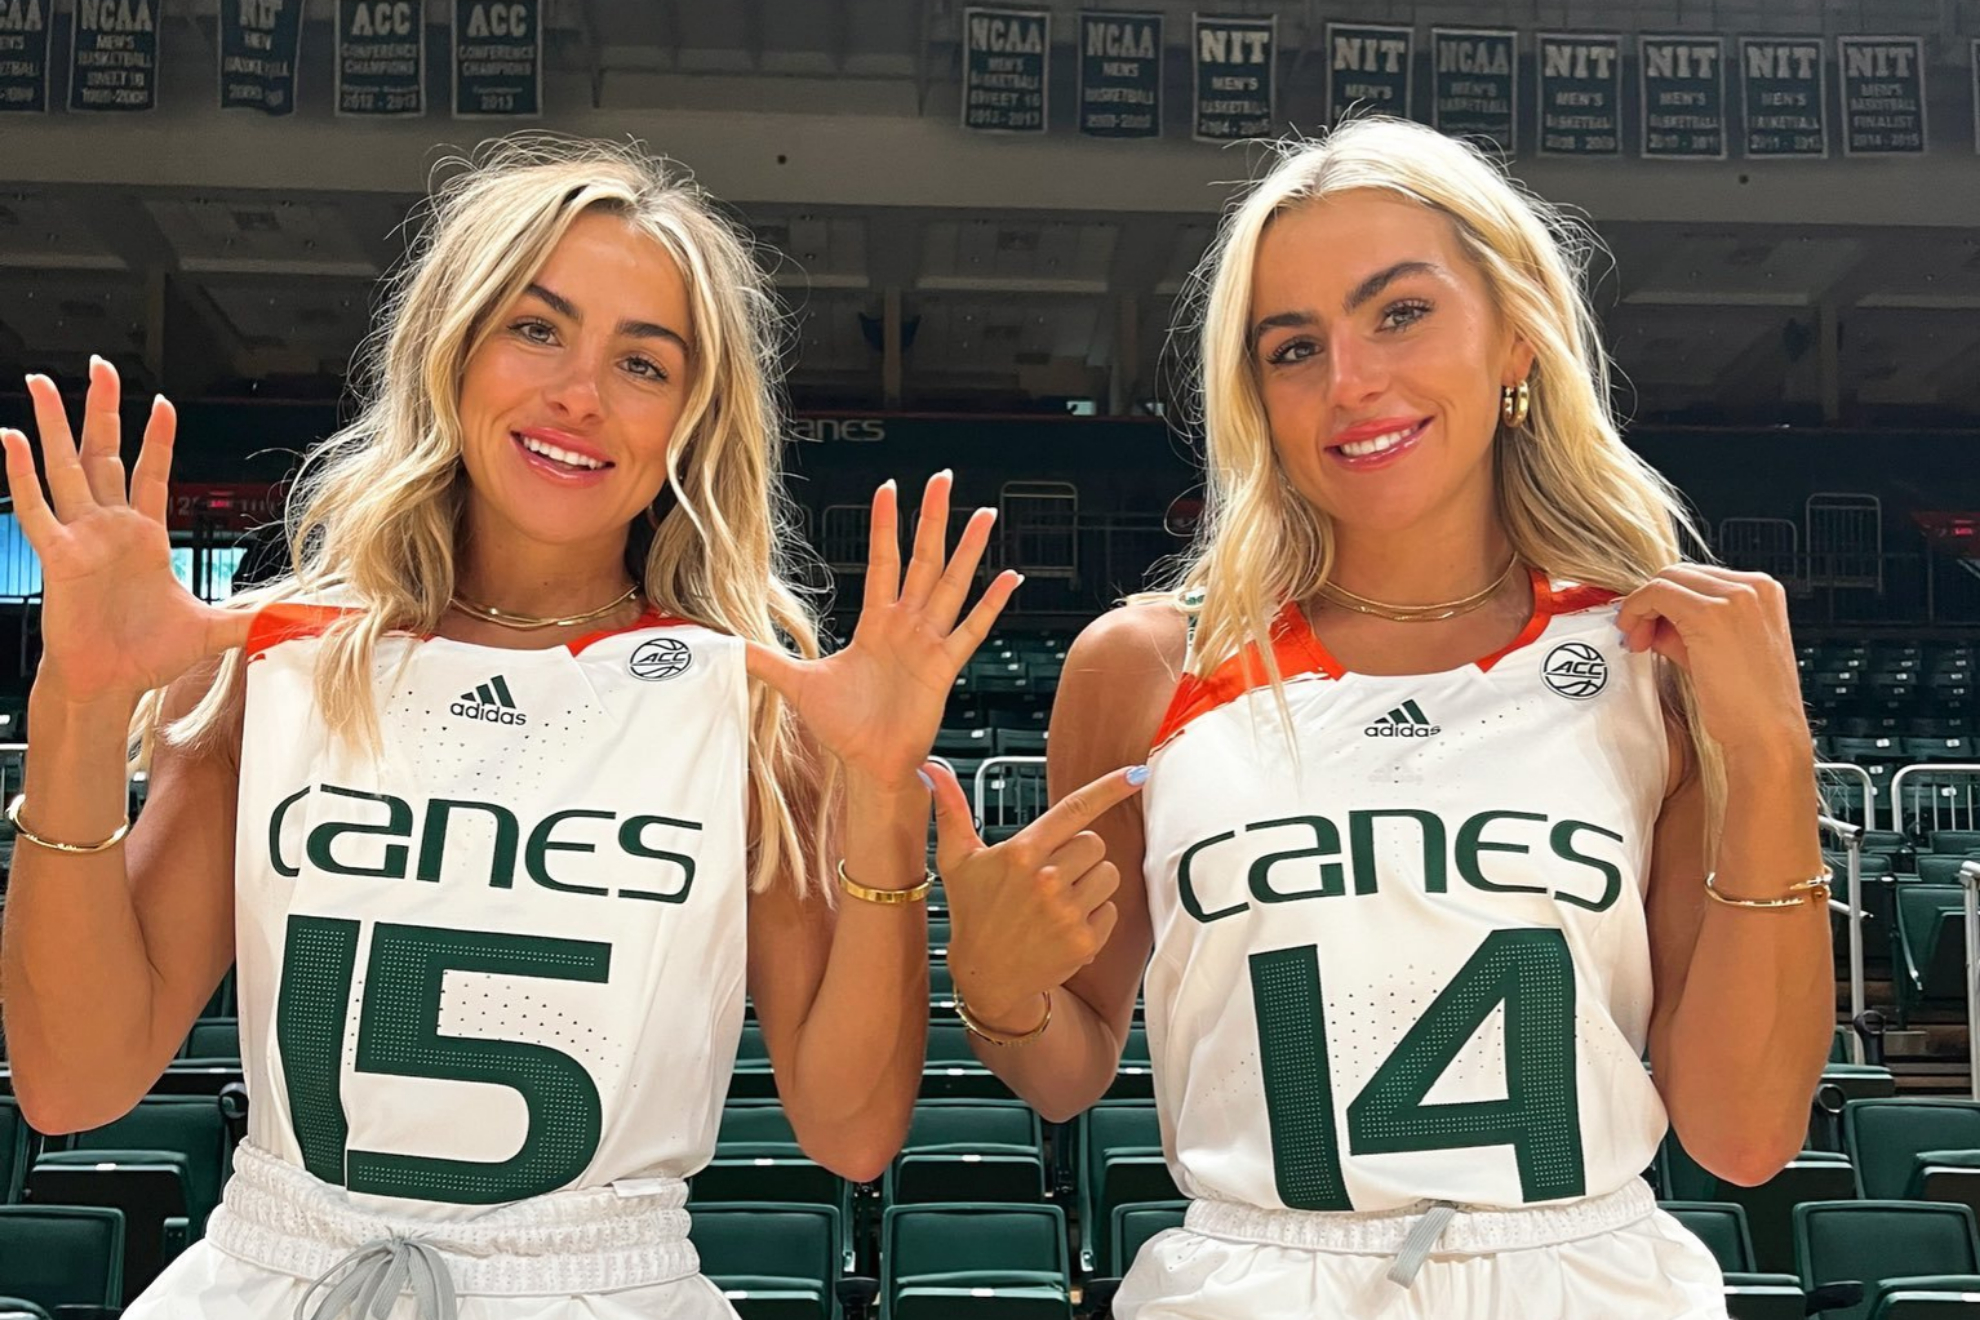 Million $ Dollar Twins: A Dynamic Duo Reshaping Sports and Fashion ...